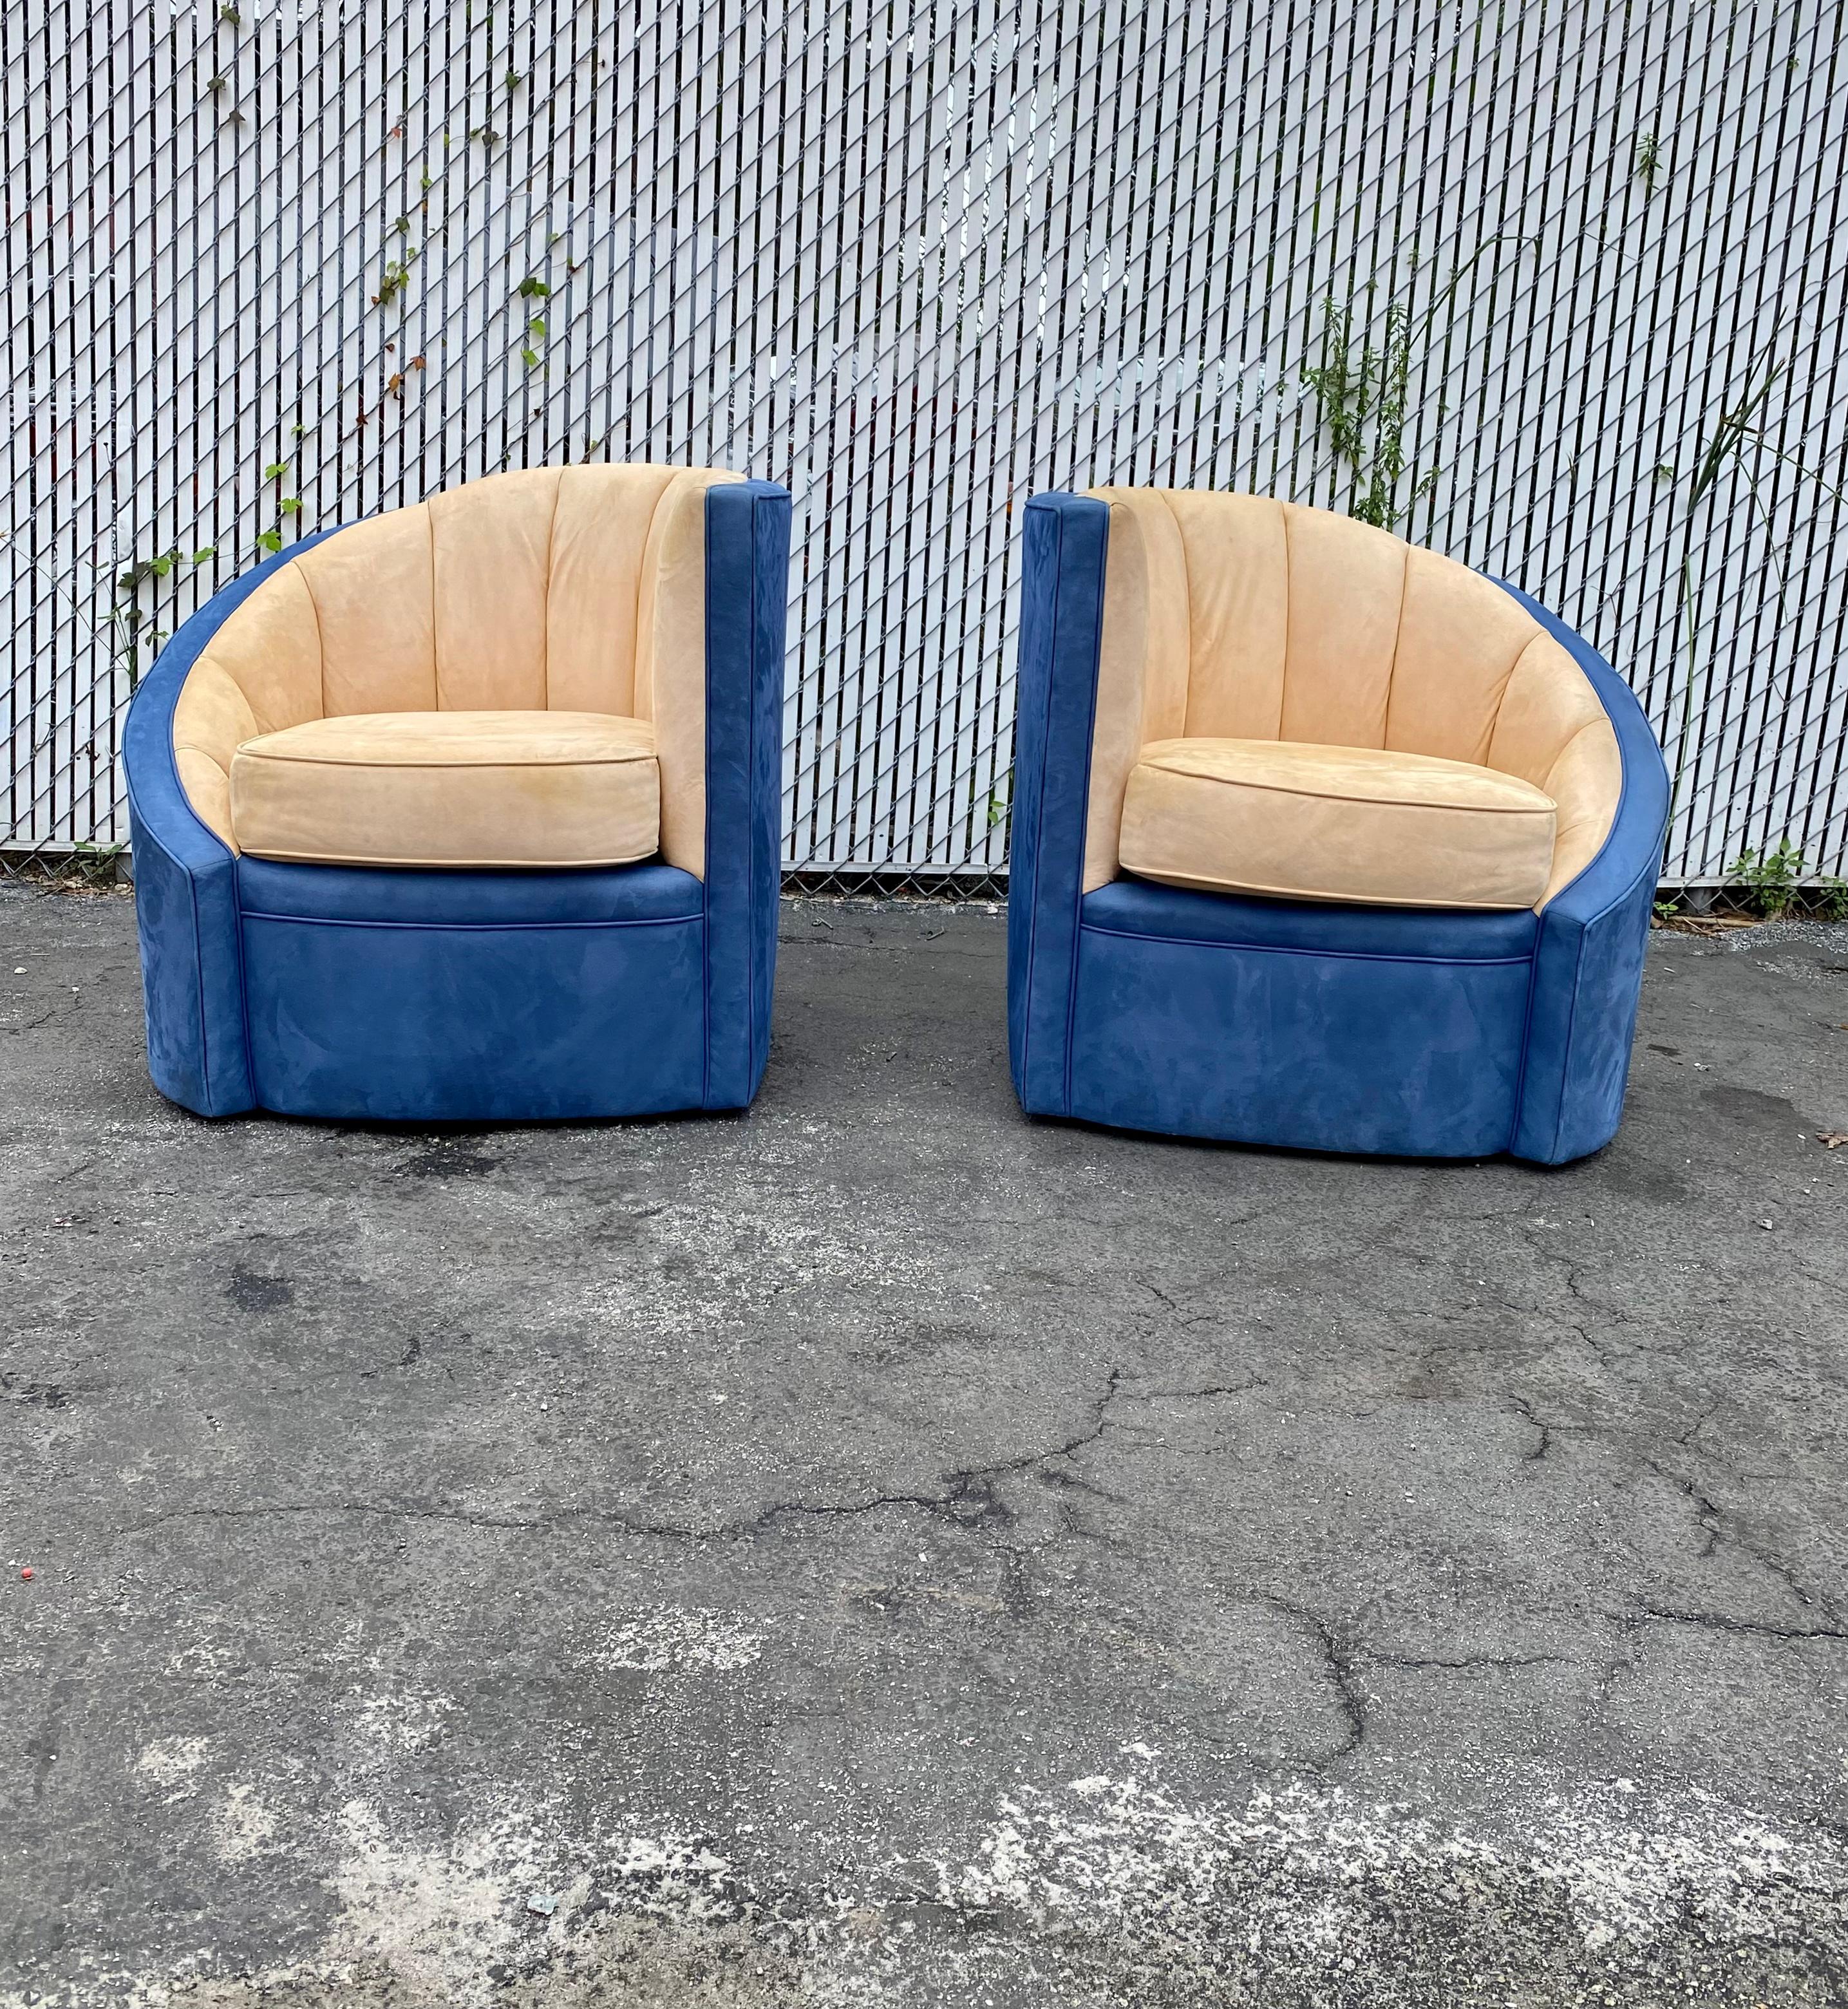 1990s Weiman Asymmetrical Channeled Barrel Chairs, Set of 2 For Sale 1